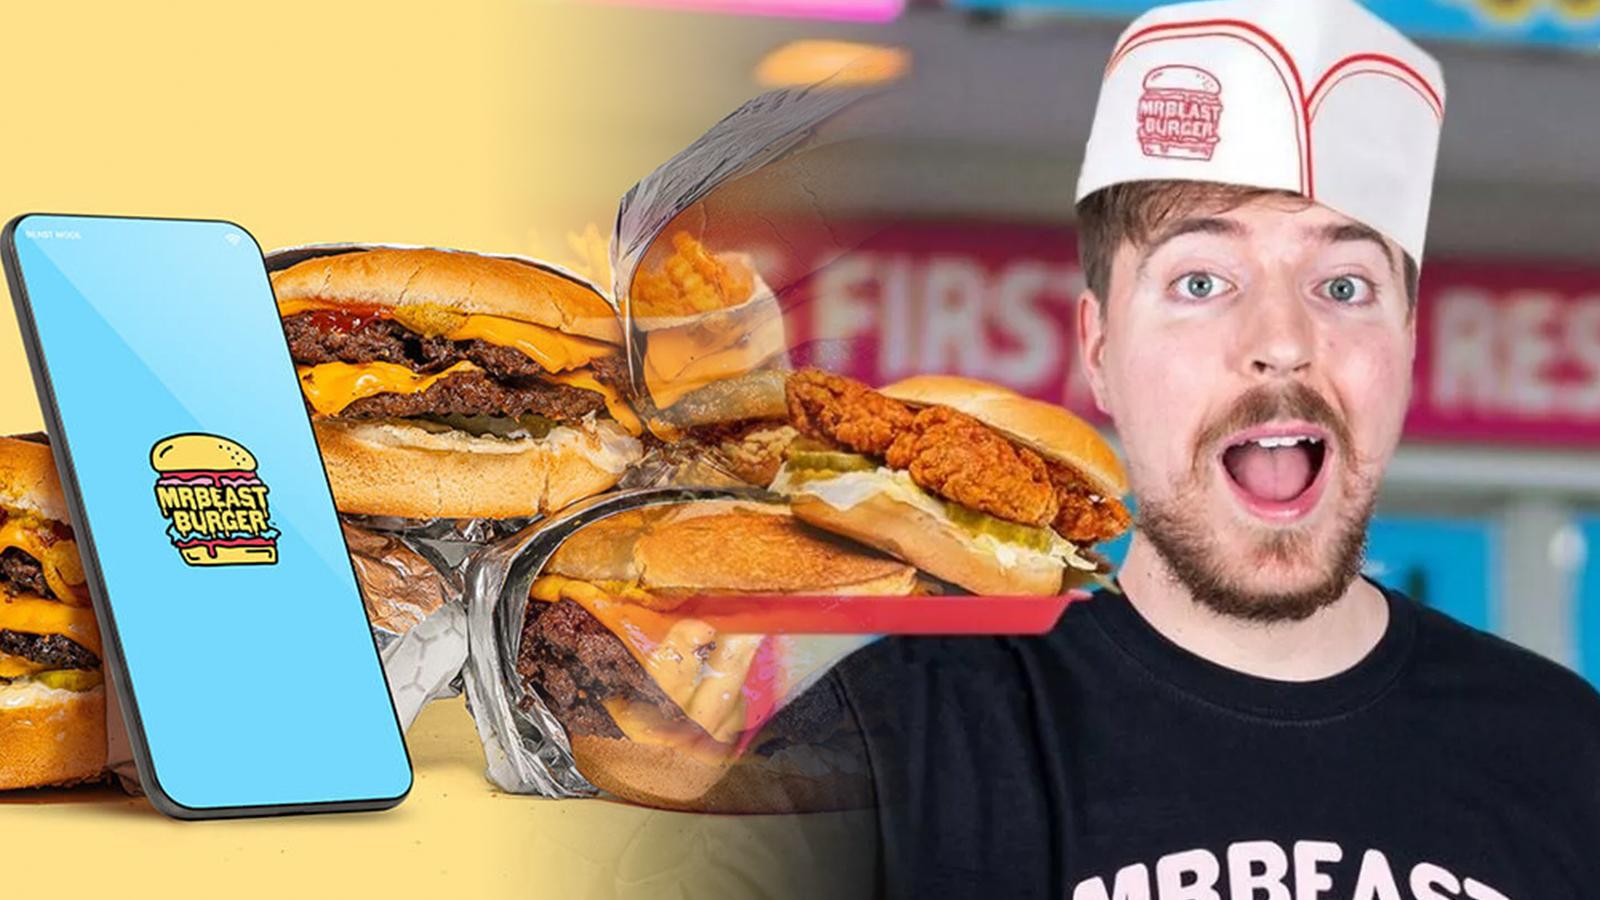 I turned Burgers into DUST to make it better, Feat. MrBeast! 